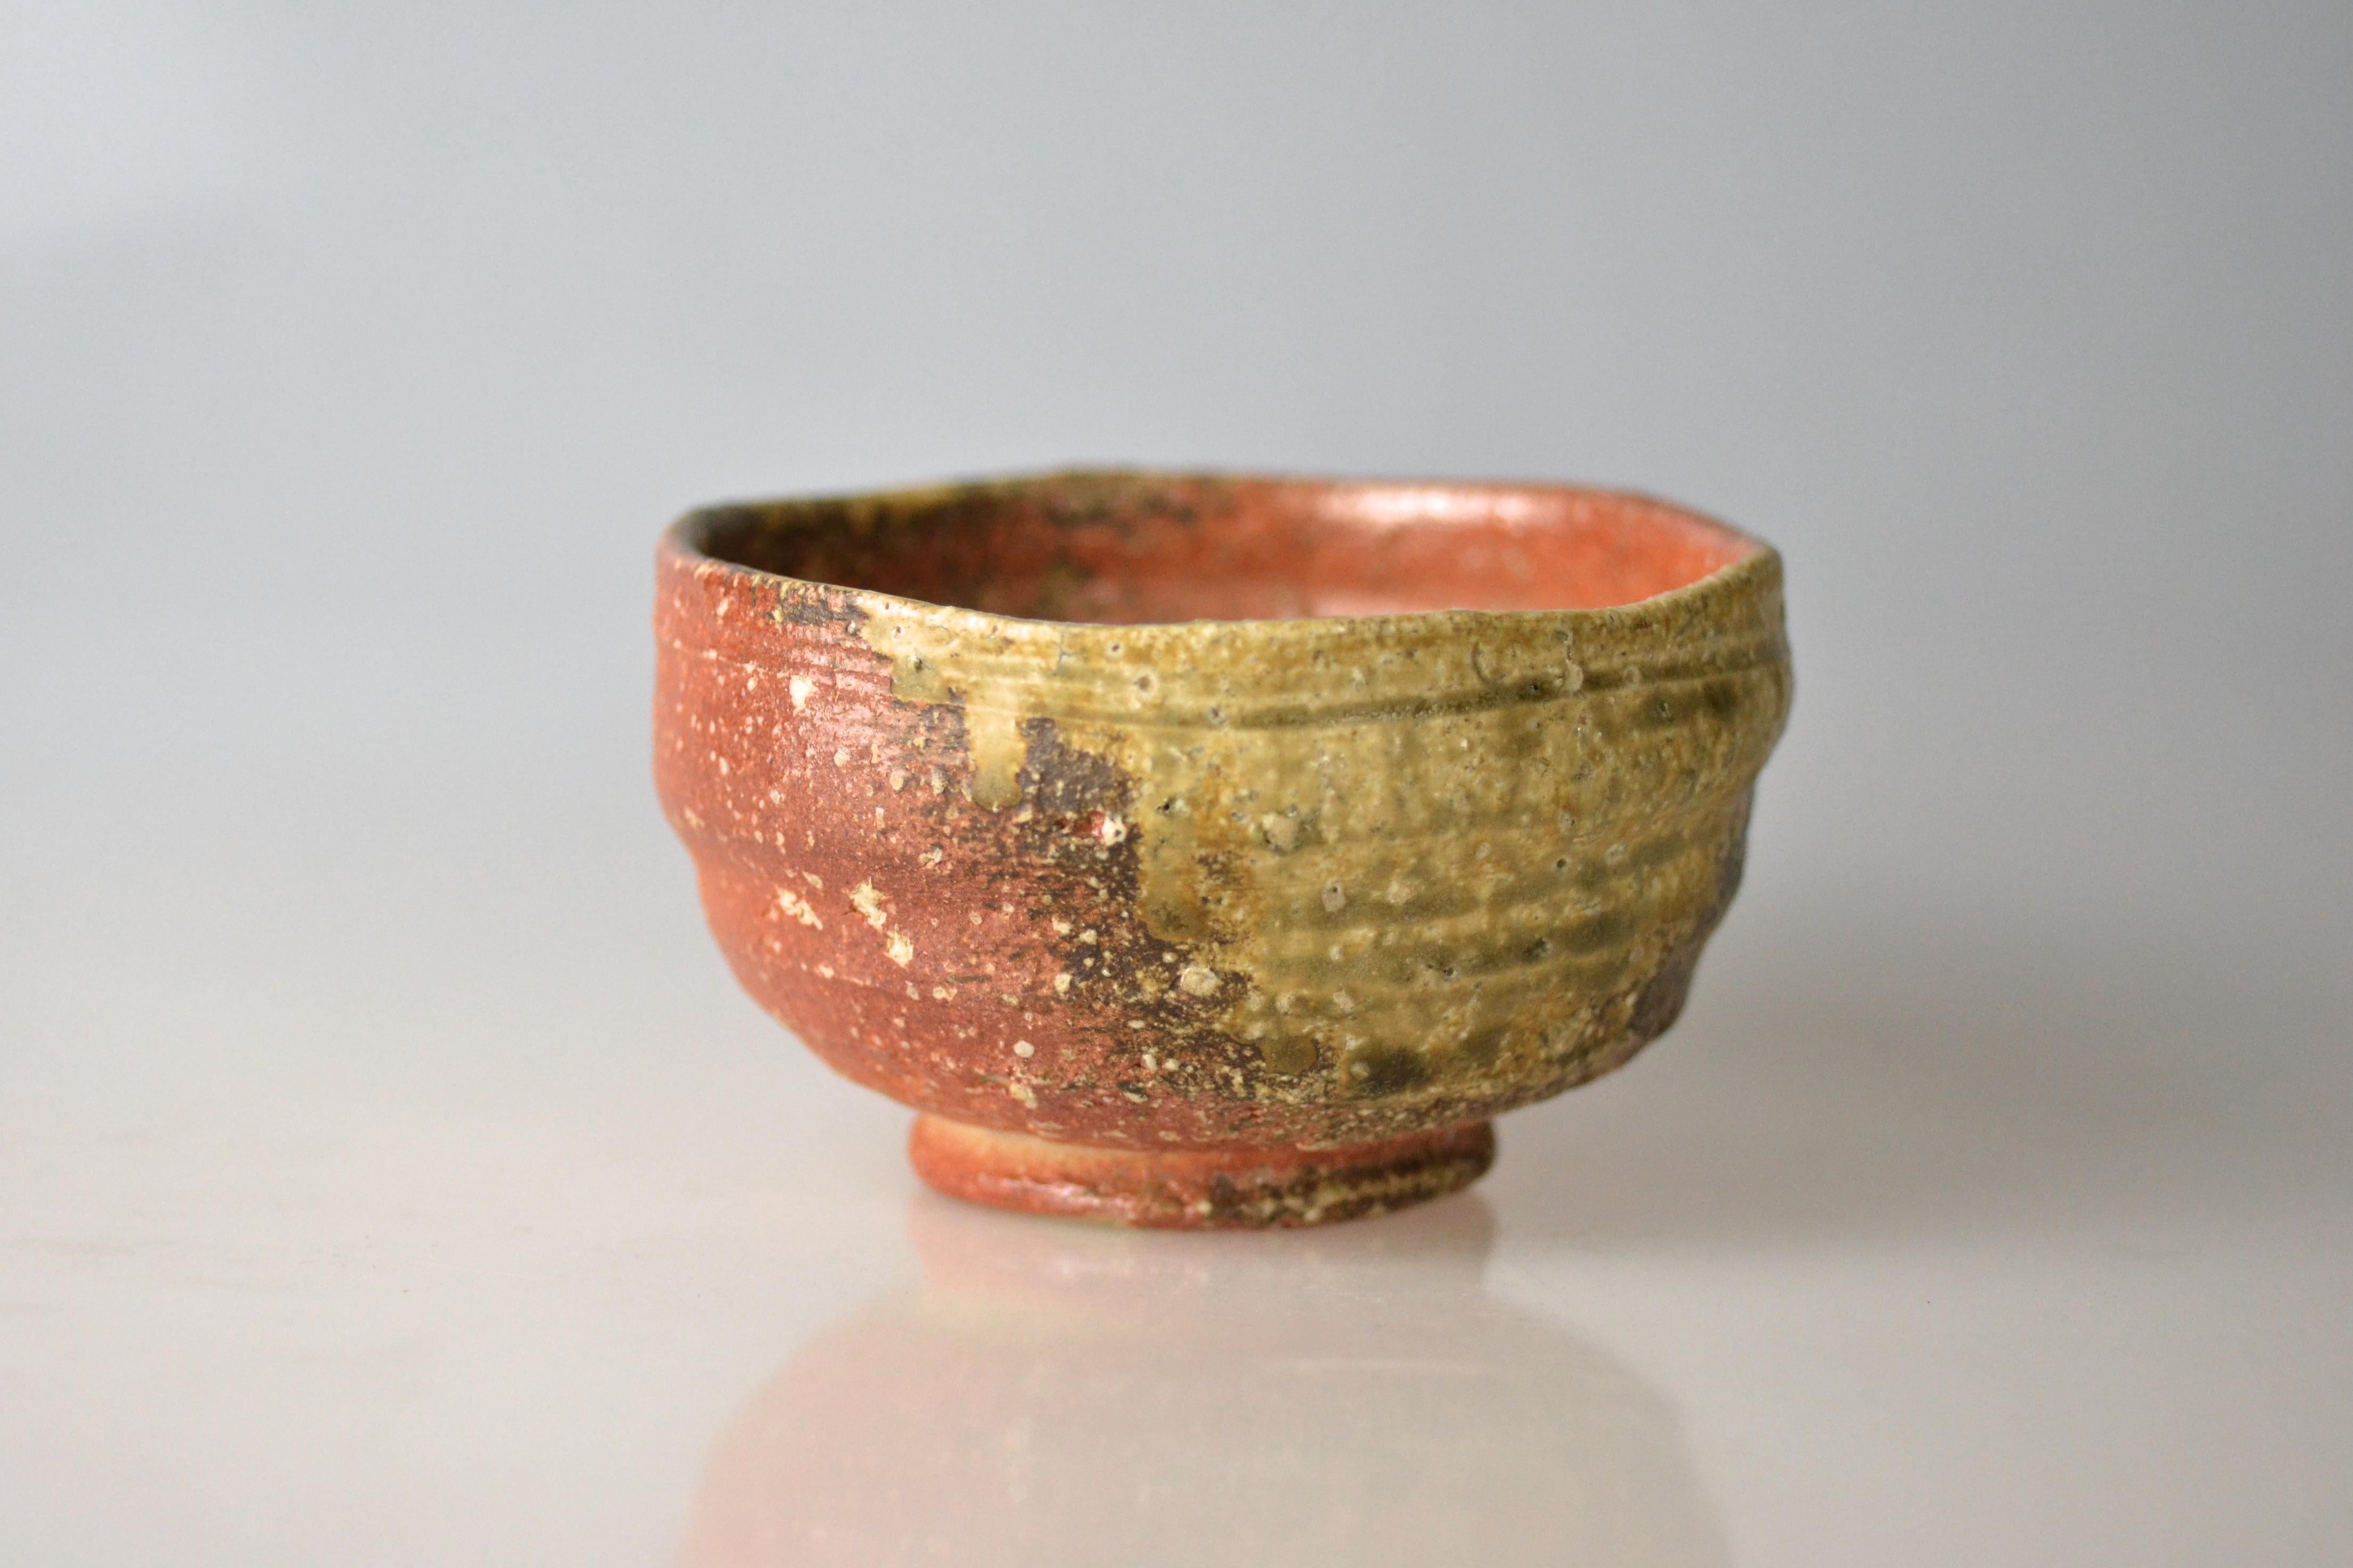 Traditional, hand-thrown tea bowl for matcha with ash glaze from wood firing. Takahashi Rakusai IV (1925) is one of Japan's grand masters of traditional pottery who specialized within his family business on Shigaraki ware. Shigaraki ware is sandy